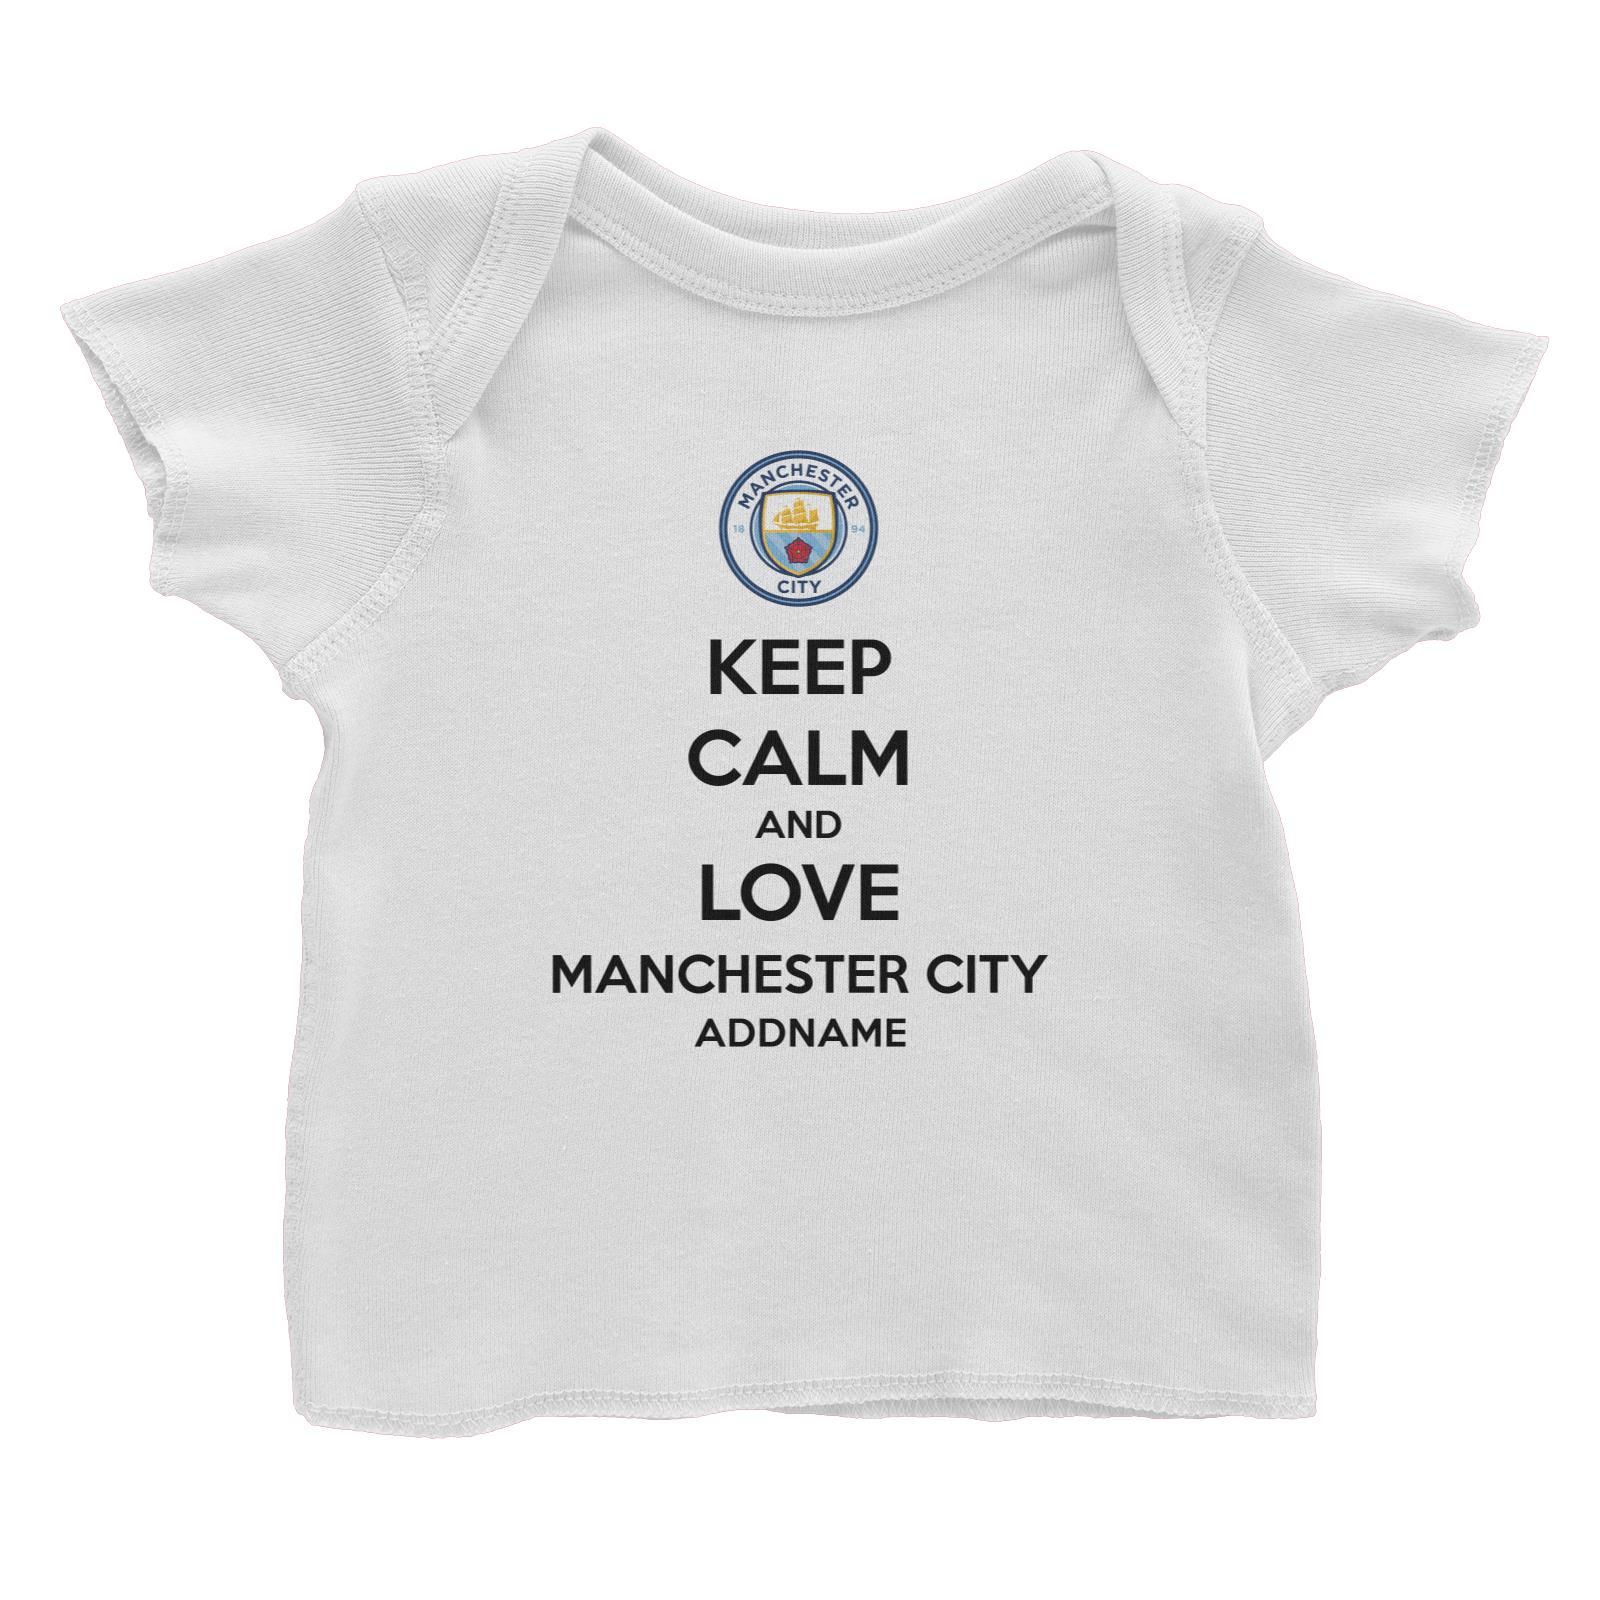 Manchester City Football Keep Calm And Love Series Addname Baby T-Shirt